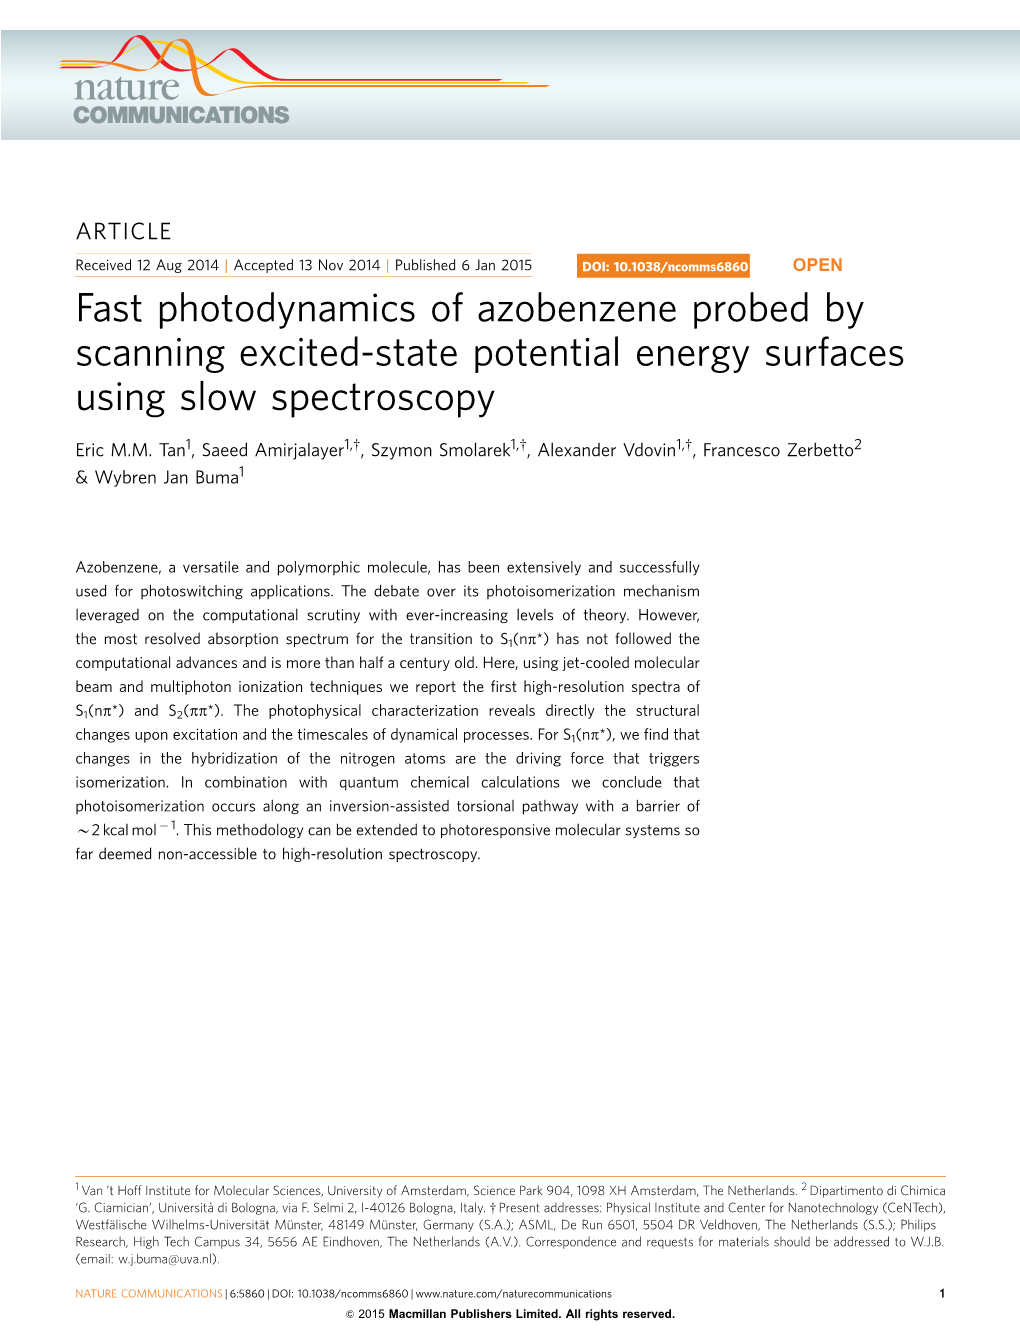 Fast Photodynamics of Azobenzene Probed by Scanning Excited-State Potential Energy Surfaces Using Slow Spectroscopy